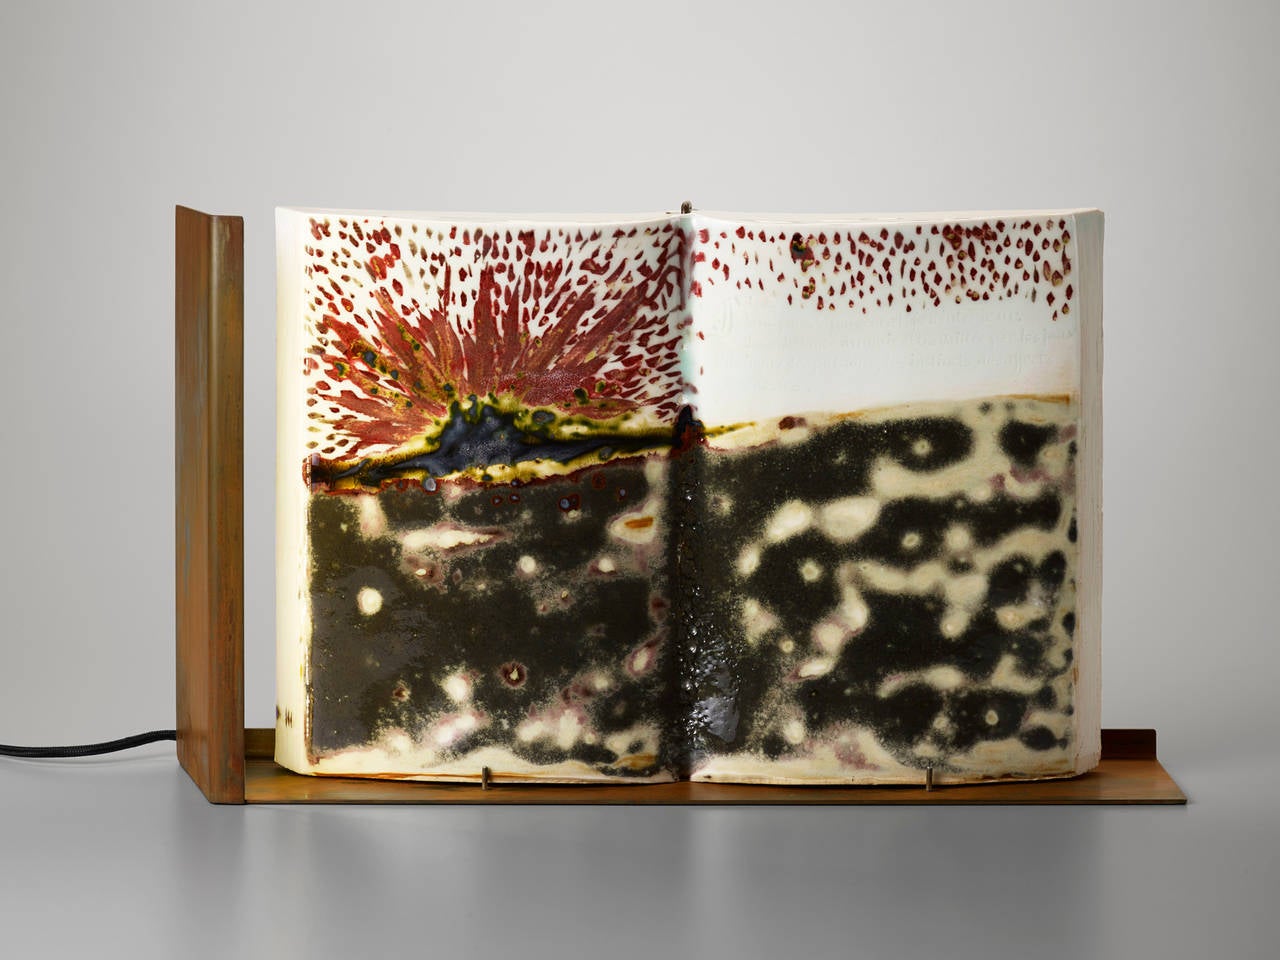 'Volcano Fire' is a unique handmade porcelain book and table lighting sculpture. It is part of the ‘Insomnio’ collection, a set of 21 striking porcelain books handmade by French visual artist Charlotte Cornaton, 28 years old, in the famous historic